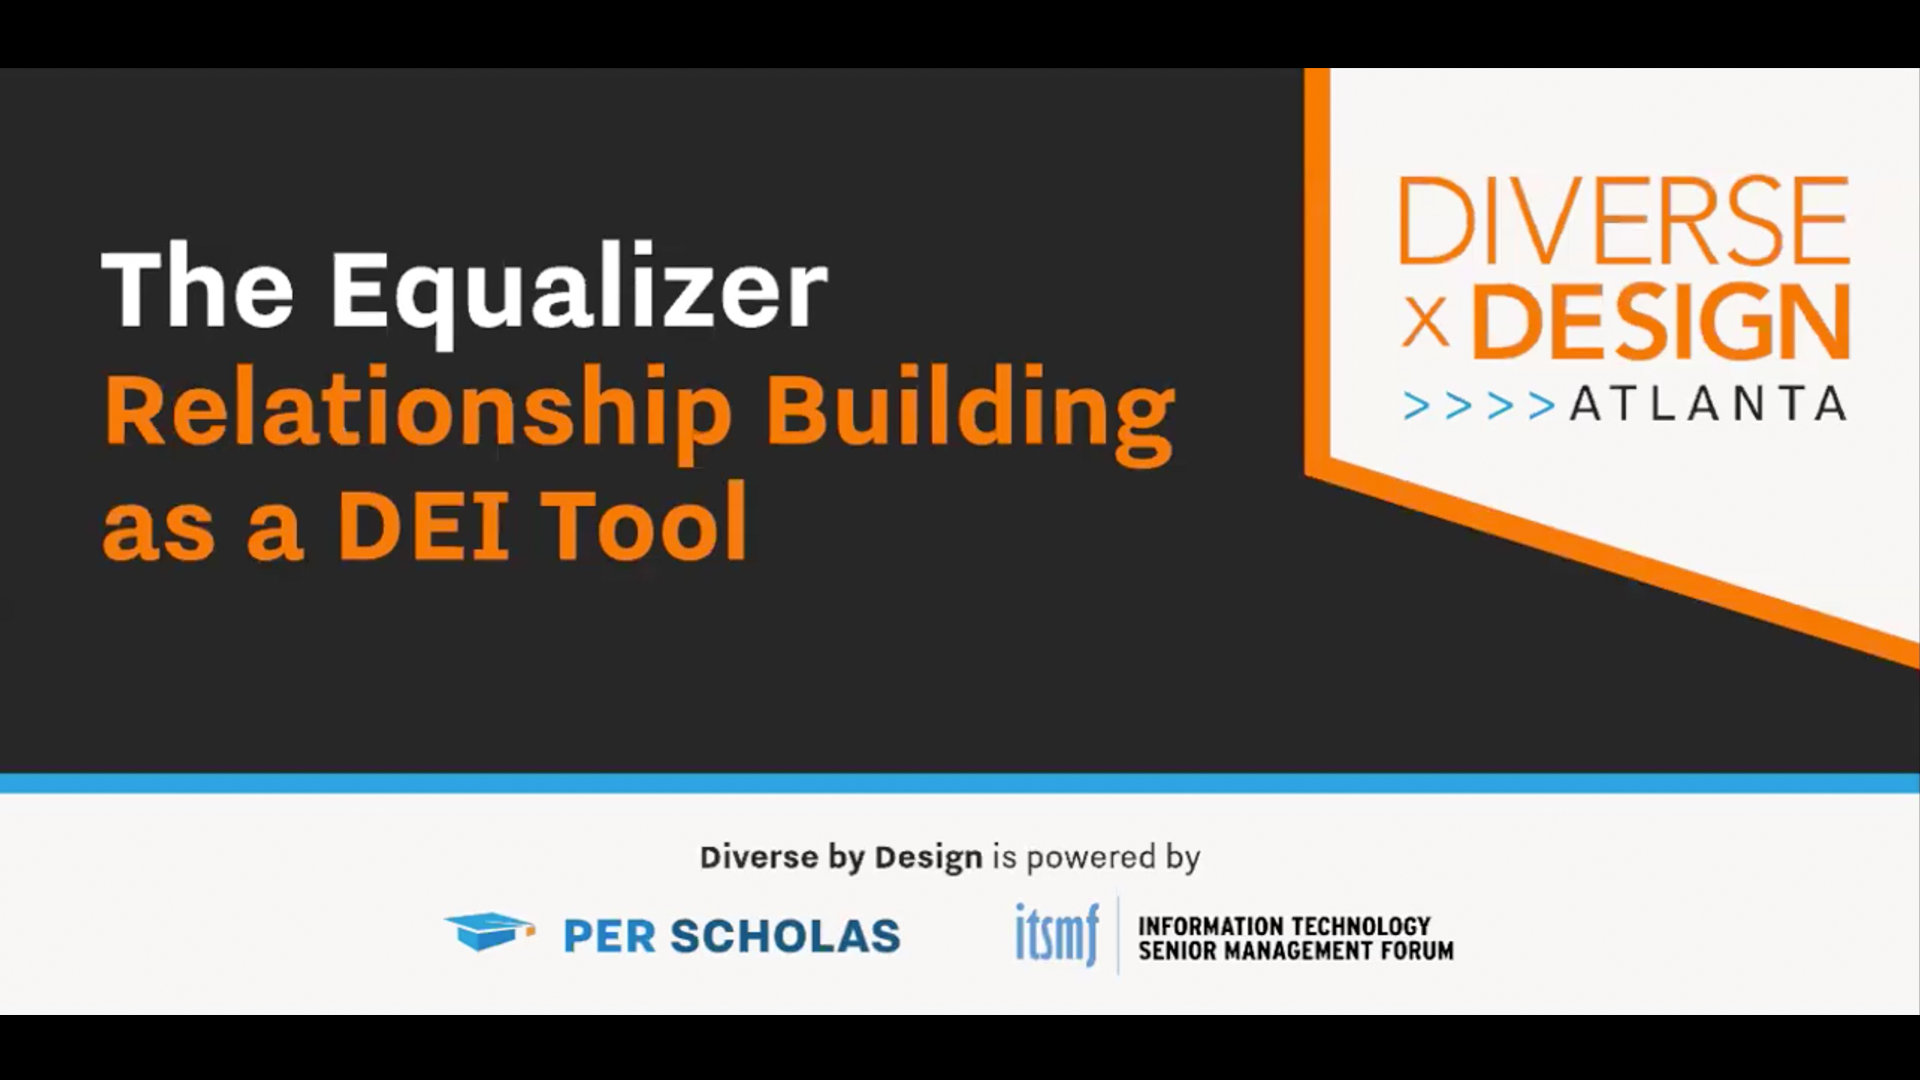 Diverse by Design Atlanta | The Equalizer: Relationship Building as a DEI Tool